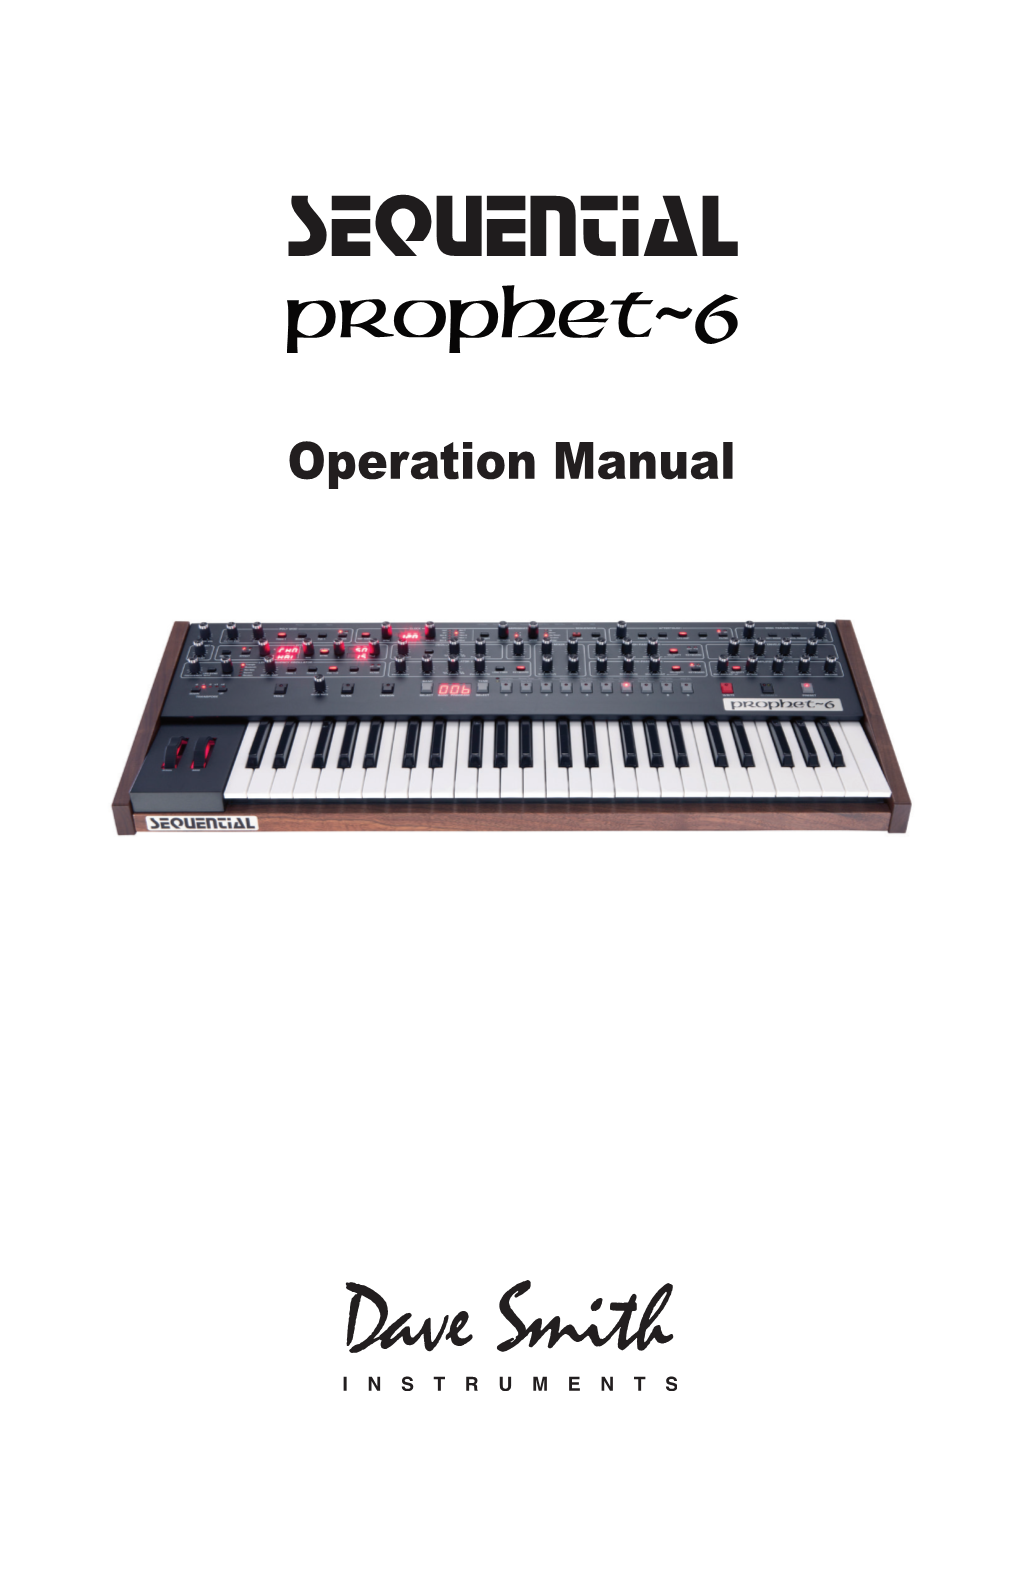 Prophet-6 Operation Manual Getting Started 1 Sound Banks the Prophet-6 Contains a Total of 1000 Programs